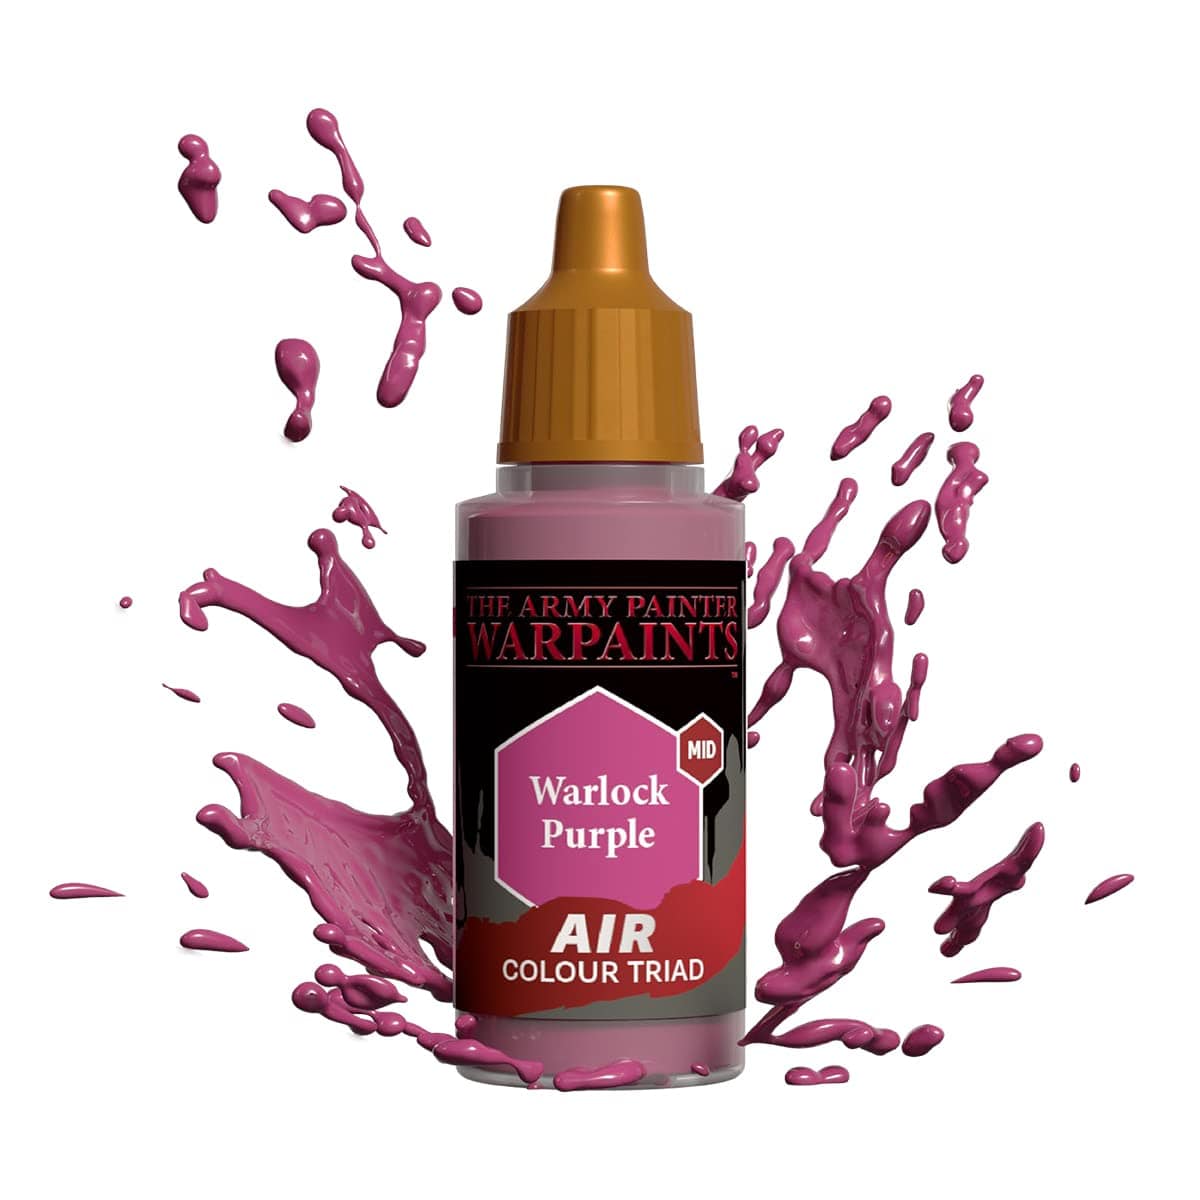 The Army Painter Warpaints Air: Warlock Purple 18ml - Lost City Toys